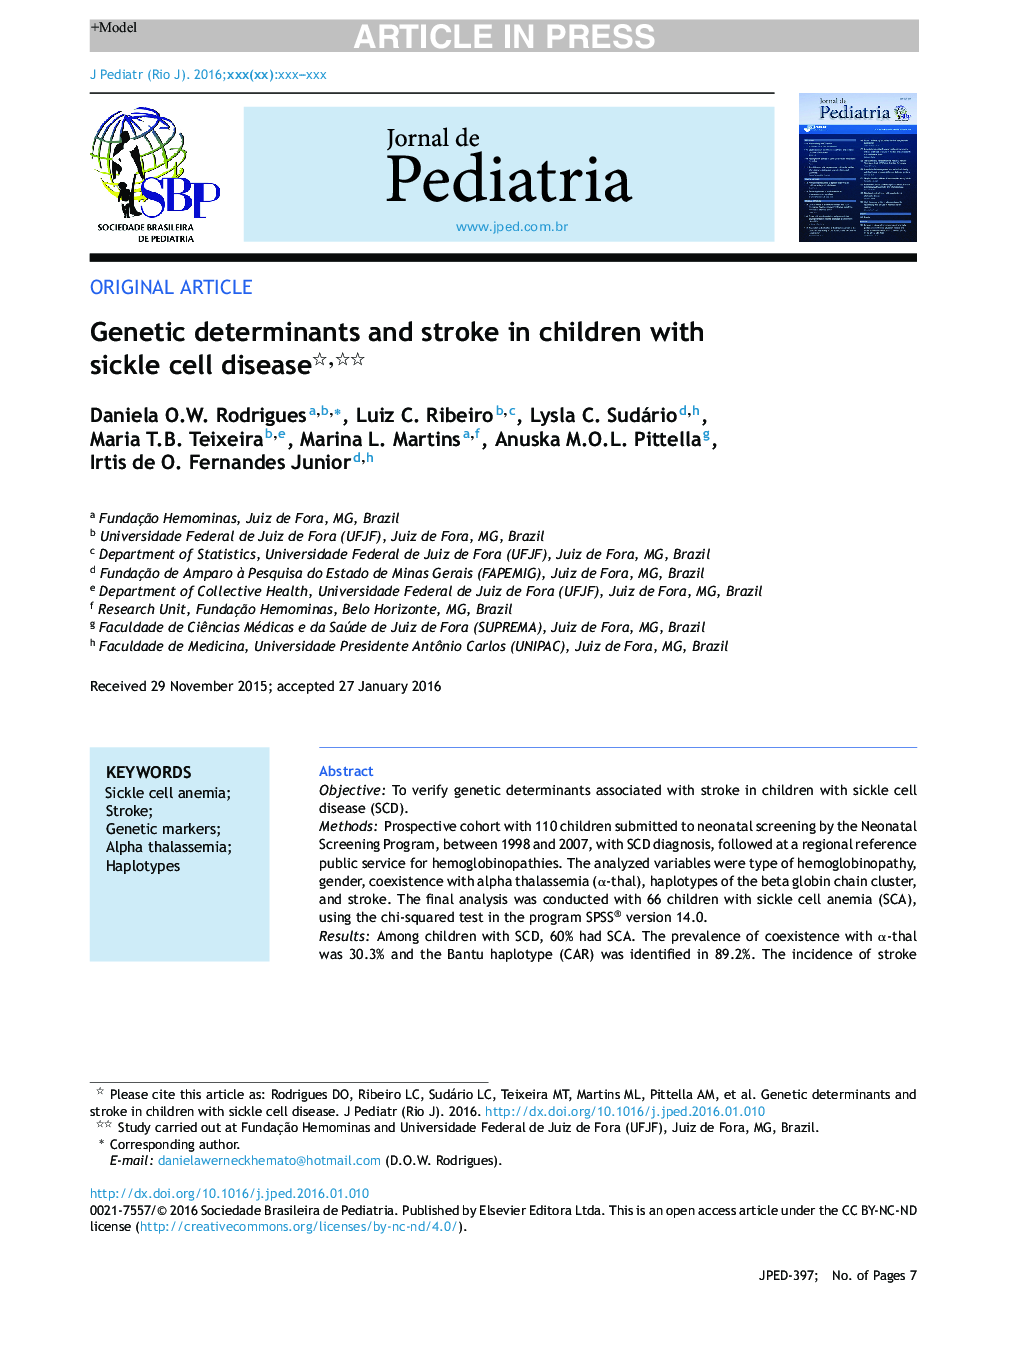 Genetic determinants and stroke in children with sickle cell disease